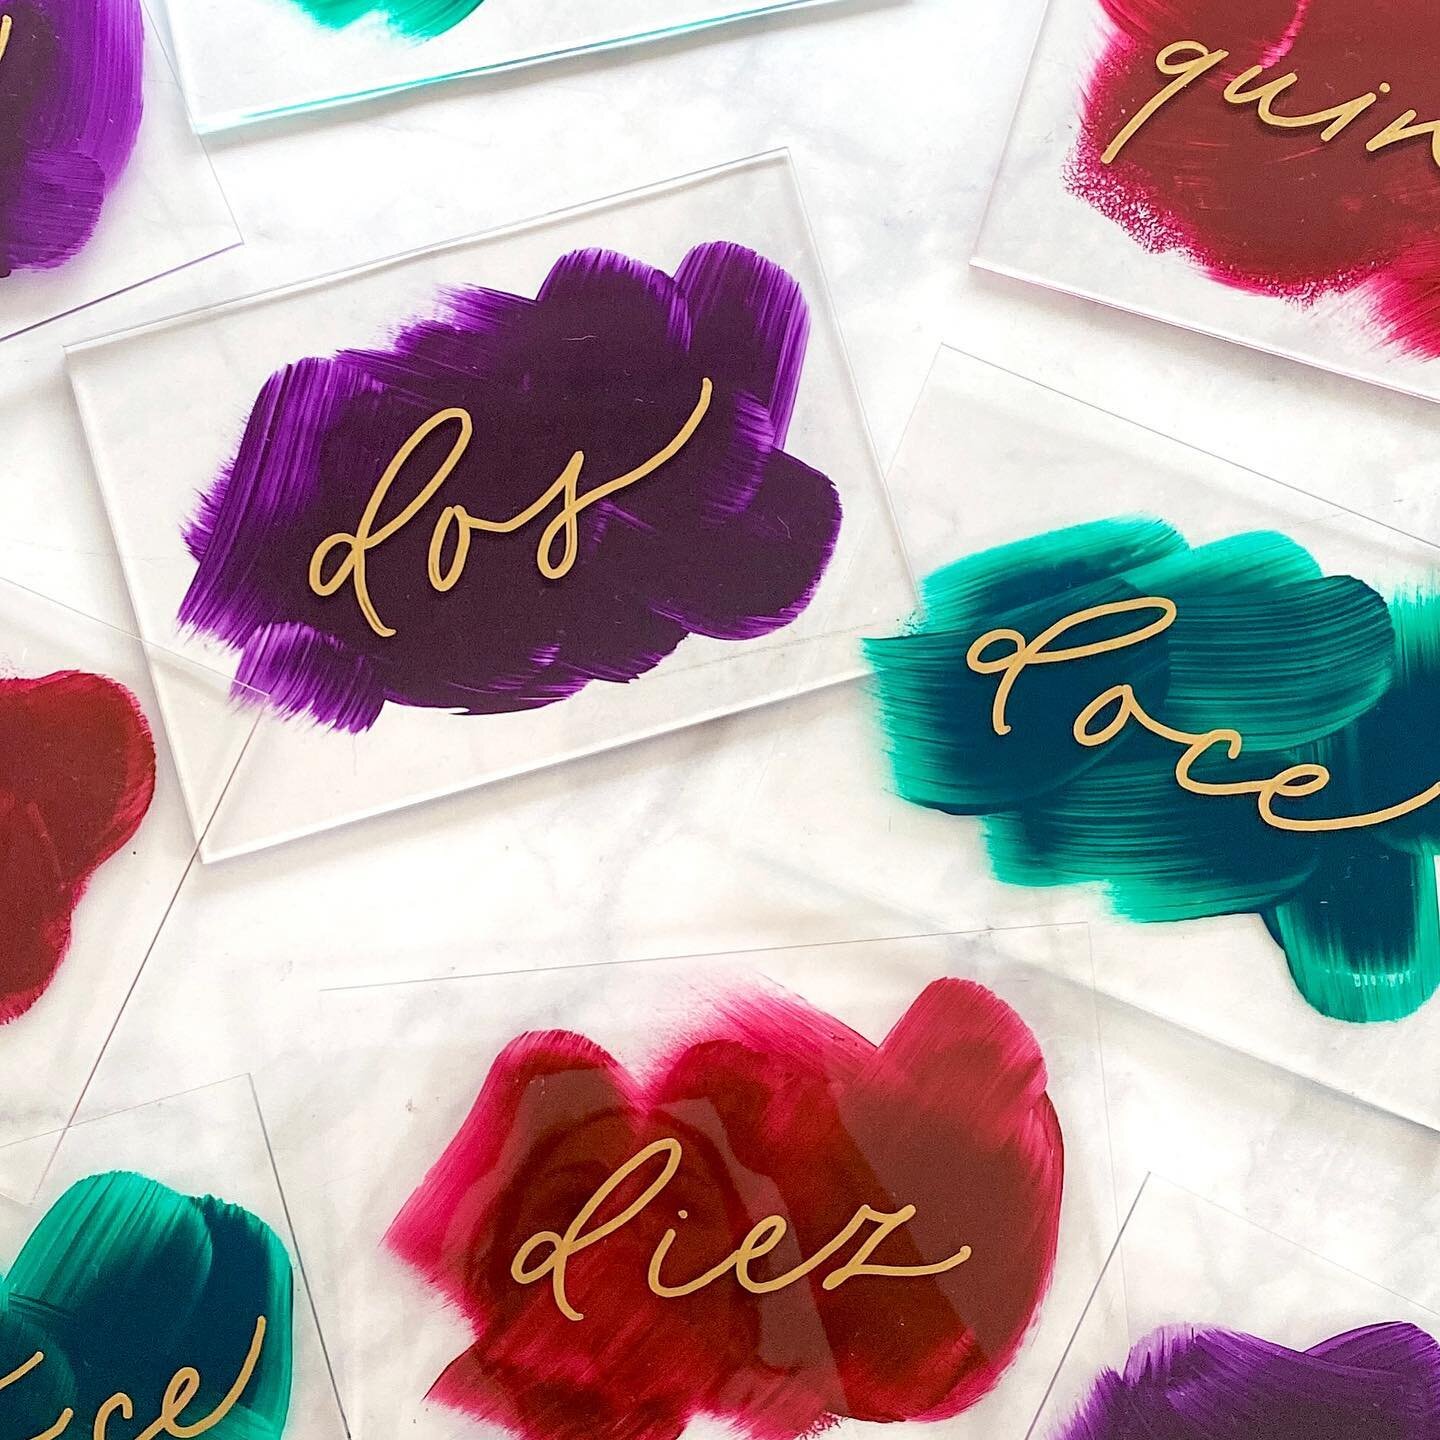 Beautiful jewel tones in these hand painted acrylic table numbers. 
.
.
#destinationwedding #destinationweddingcostarica #weddinginspo #tablenumbers #acrylictablenumbers #costaricawedding #bodacostarica